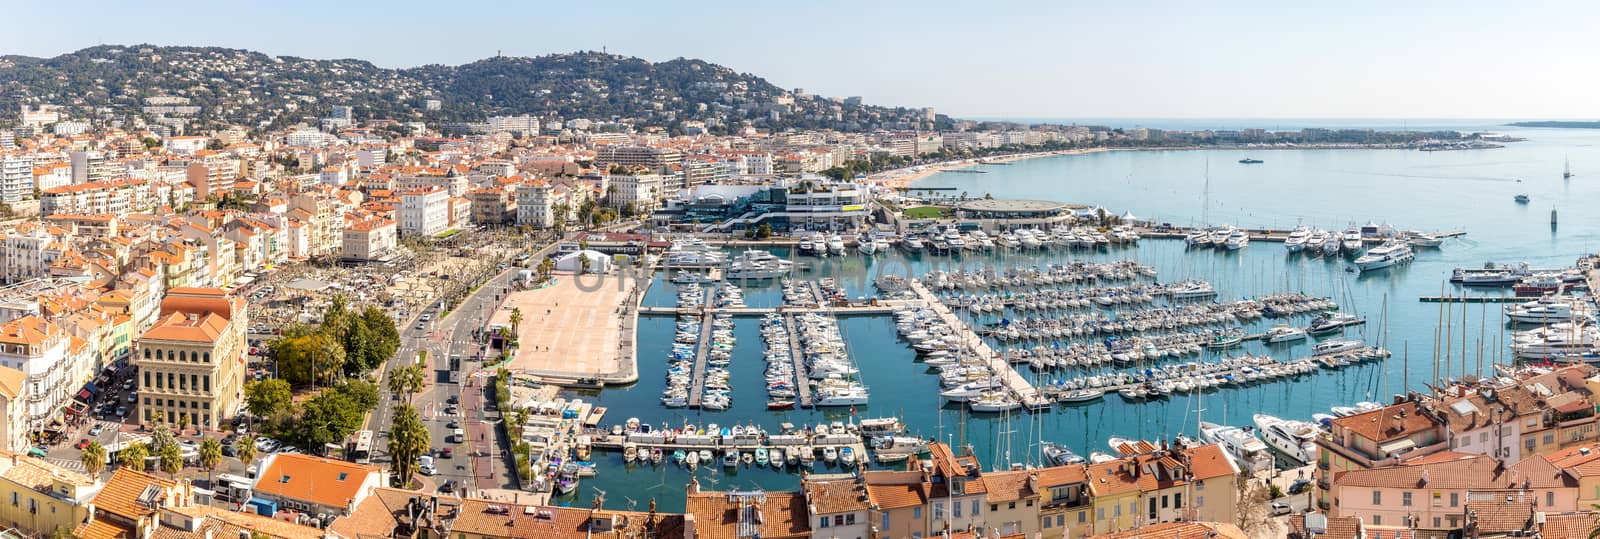 aerial view of Le Suquet- the old town and Port Le Vieux of Cannes, France Panorama